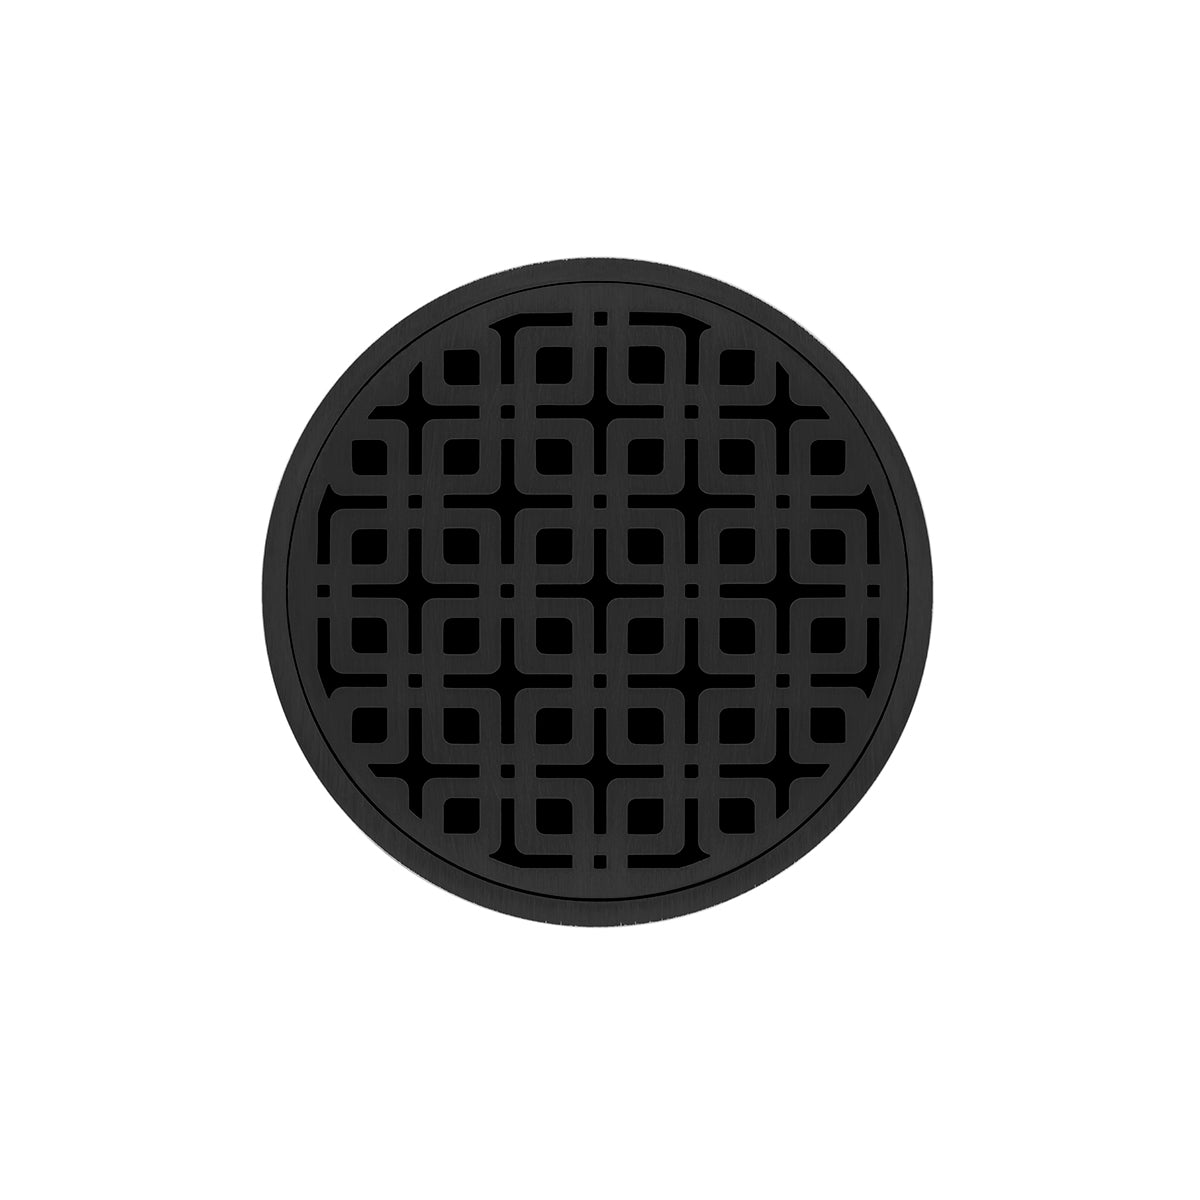 Infinity Drain 5" Round RKDB 5 Premium Center Drain Kit with Link Pattern Decorative Plate with ABS Bonded Flange Drain Body, 2", 3" and 4" Outlet